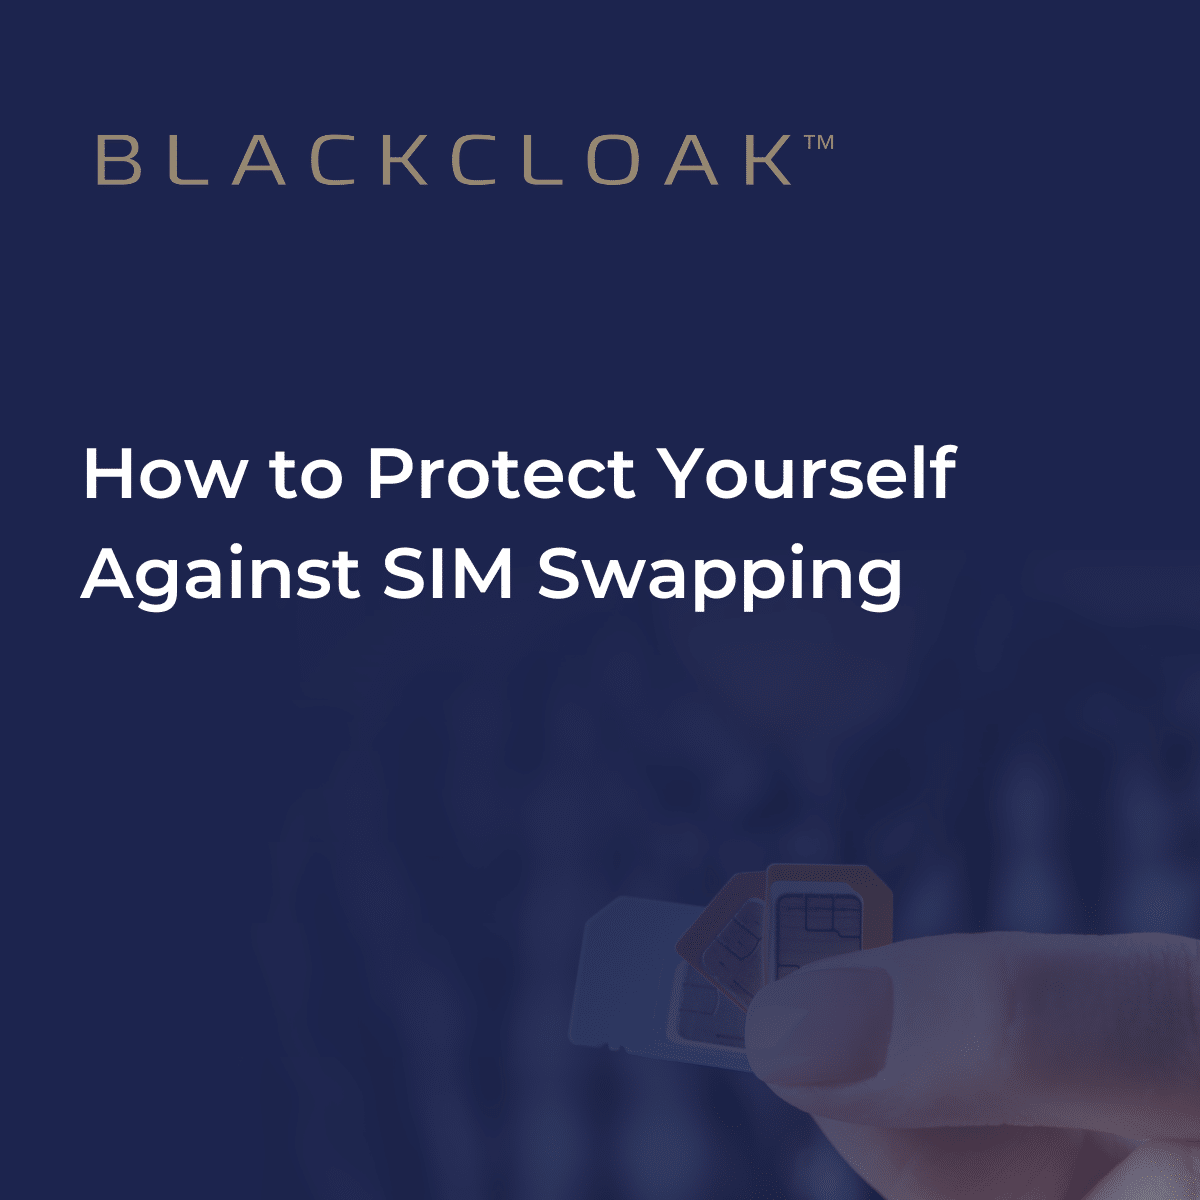 How to protect yourself from SIM Swapping